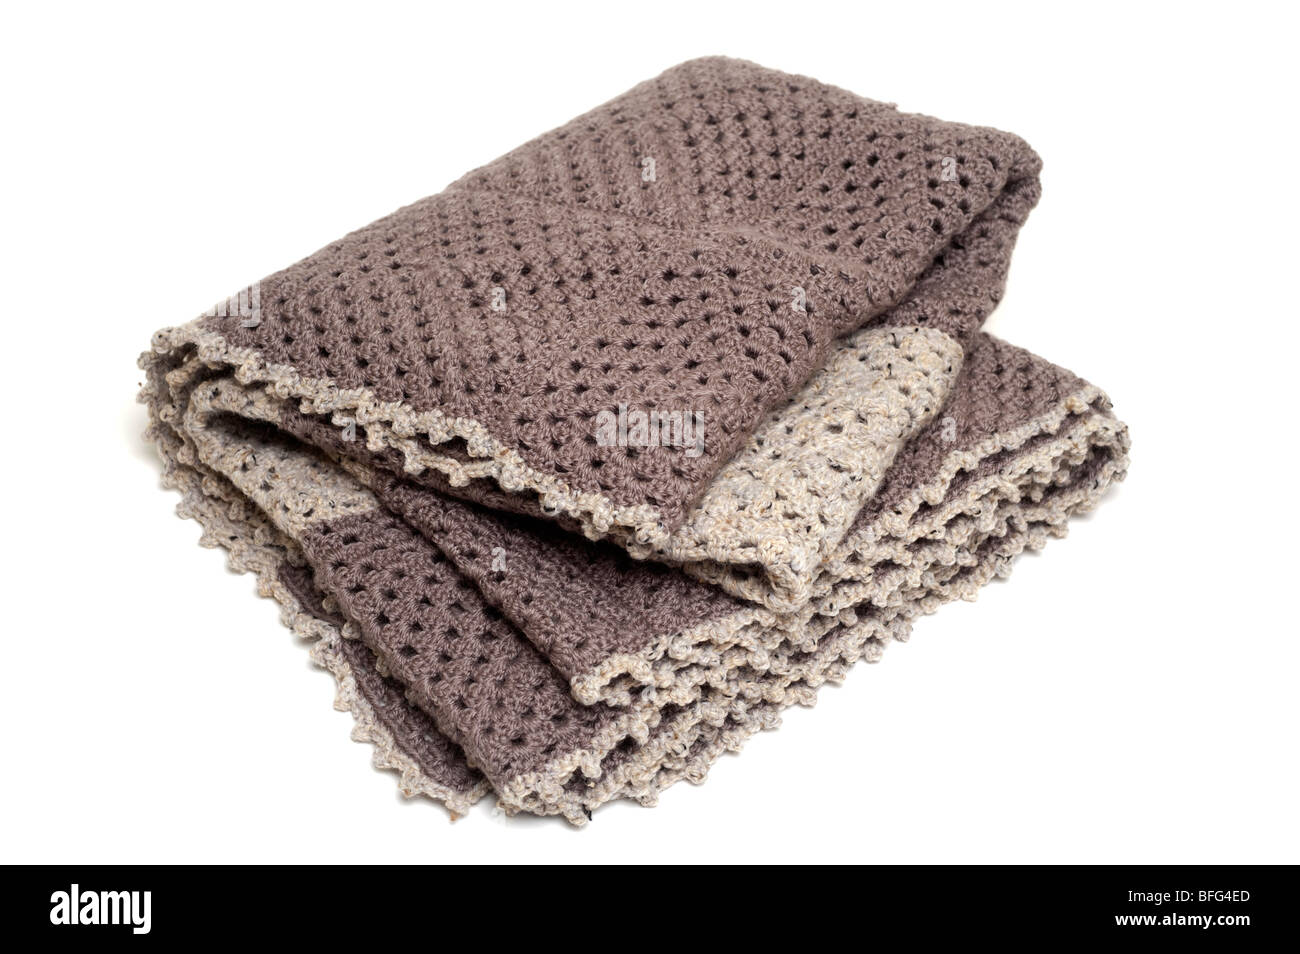 Brown and beige coloured crocheted blanket Stock Photo